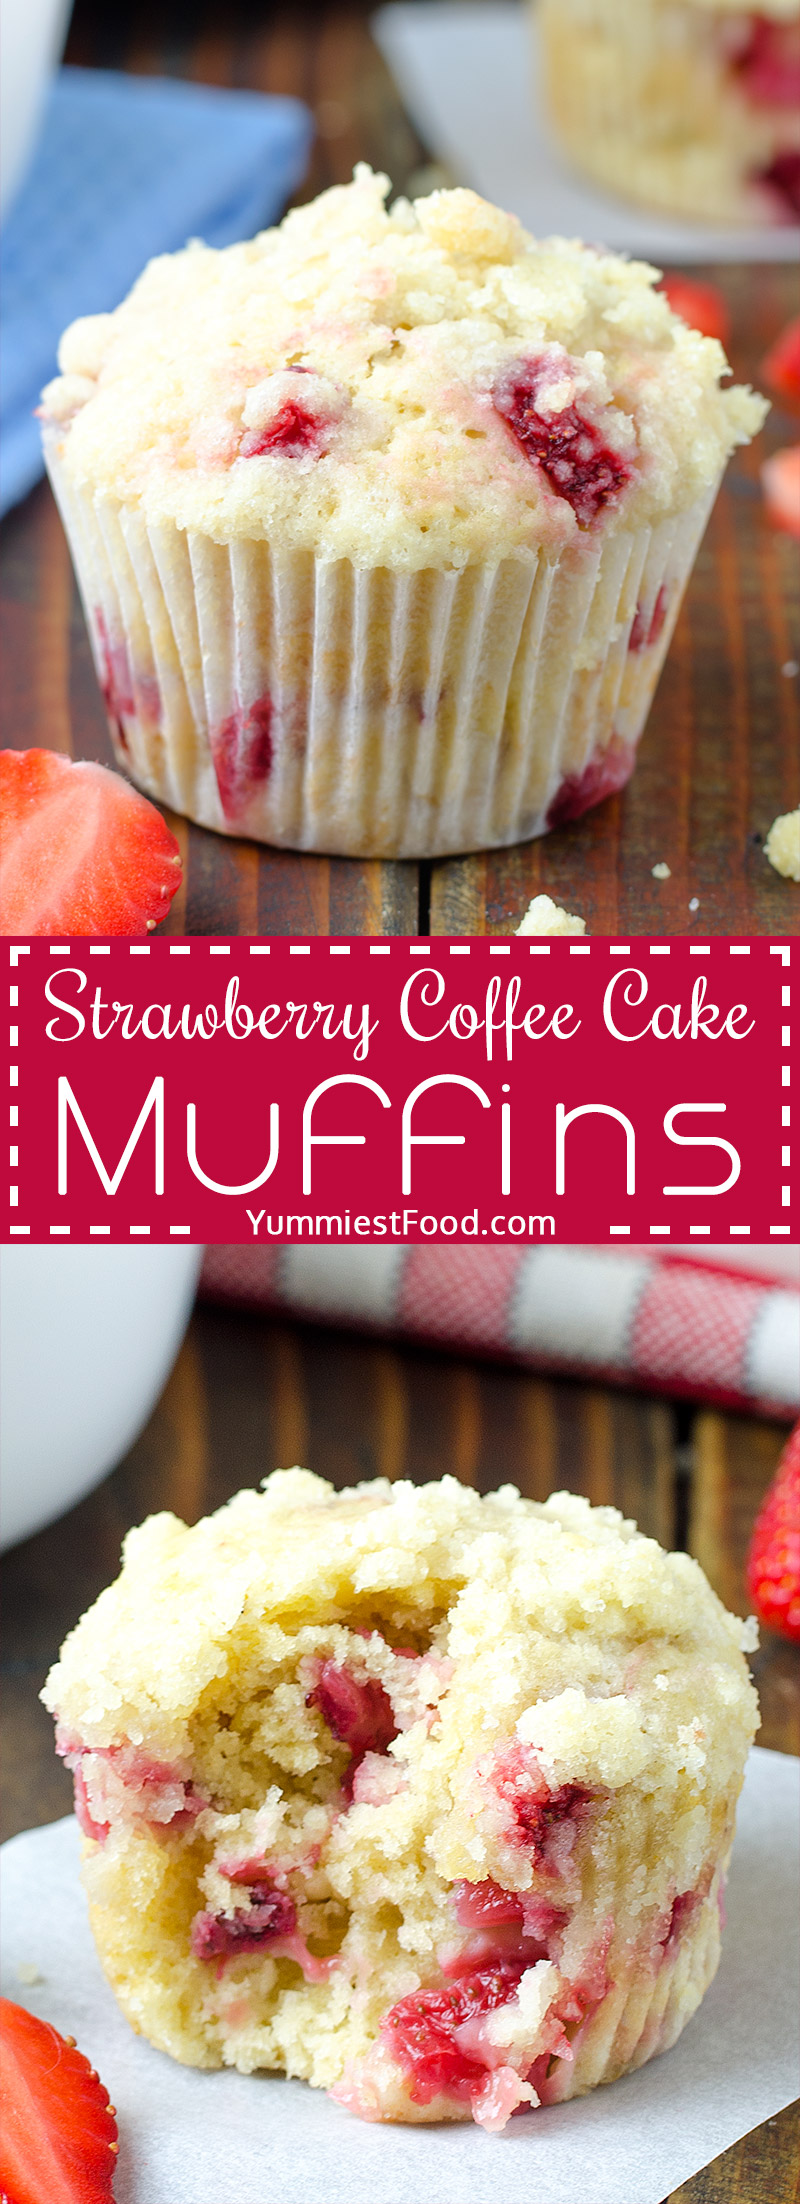 Easy and delicious Strawberry Coffee Cake Muffins, the perfect muffins to make during strawberry season